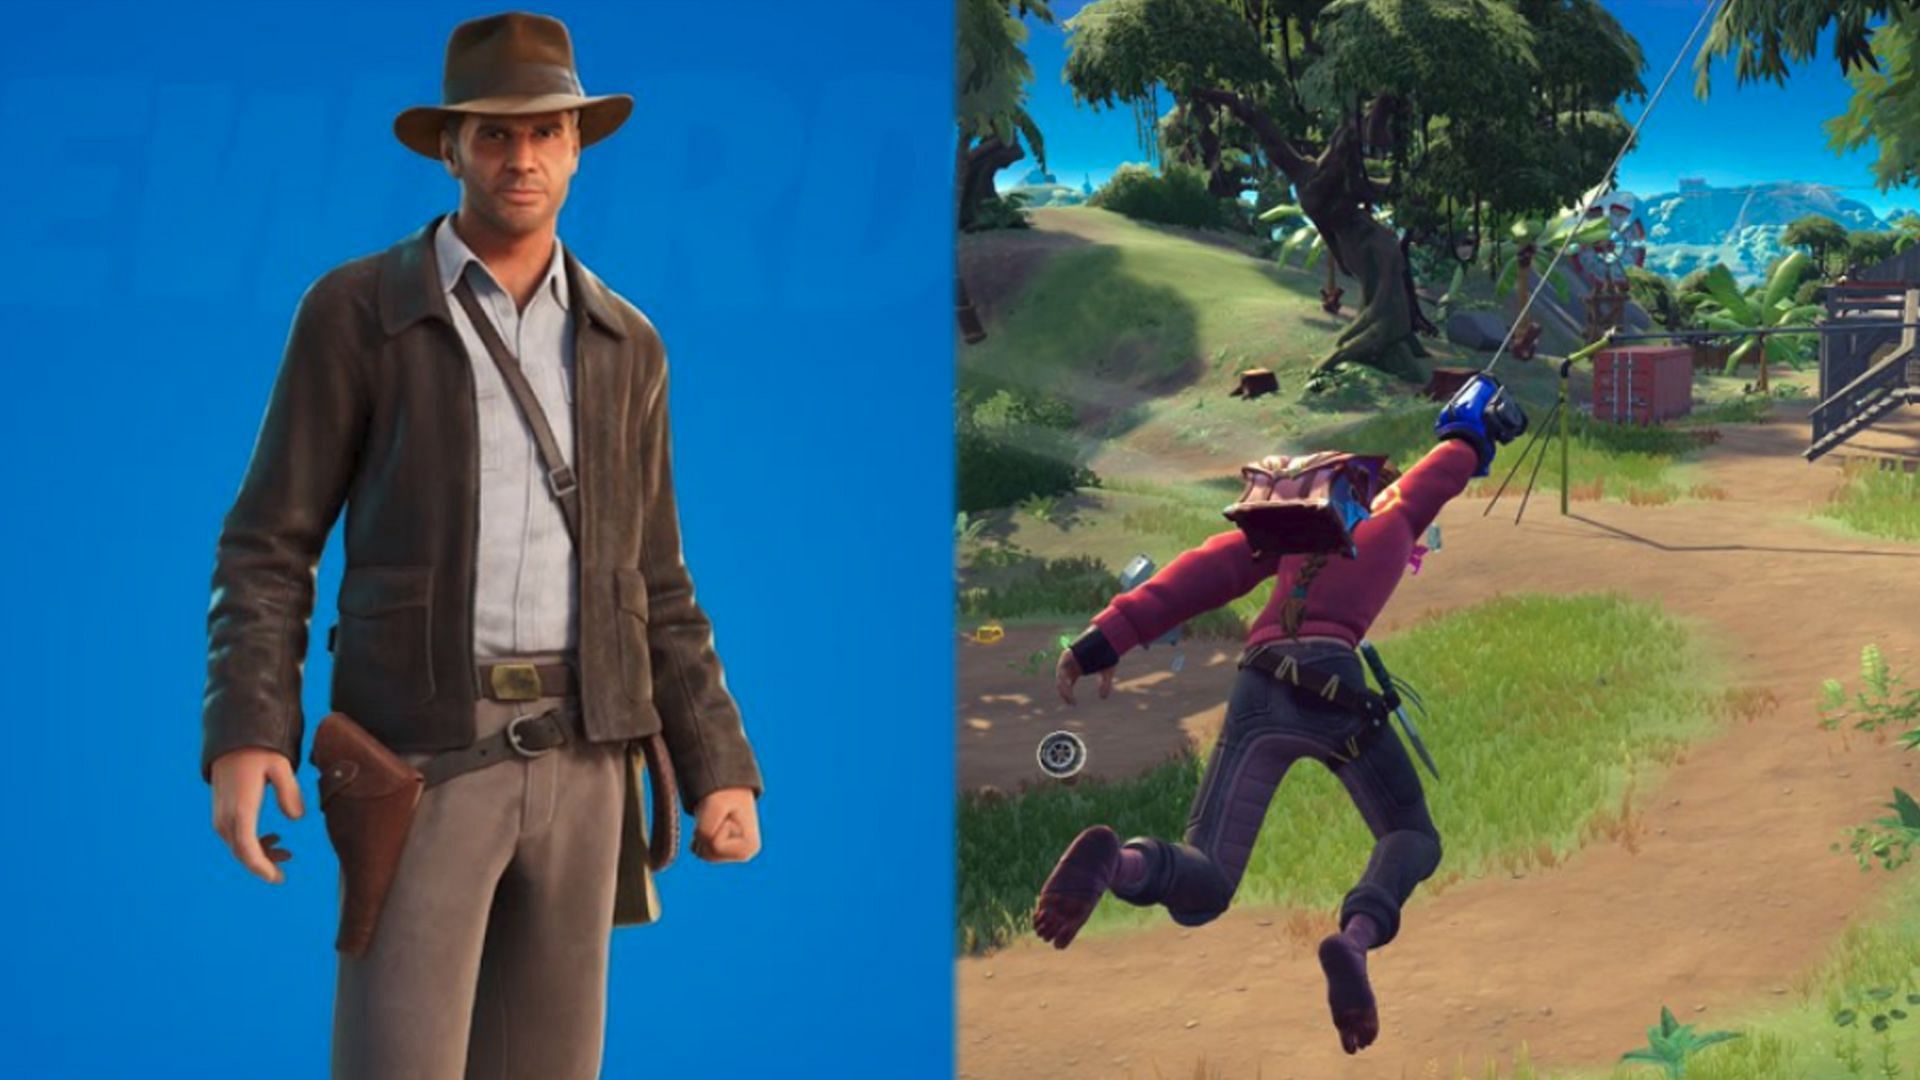 Fortnite players will need to use the Grapple Glove to complete the Indiana Jones challenges (Image via Sportskeeda)